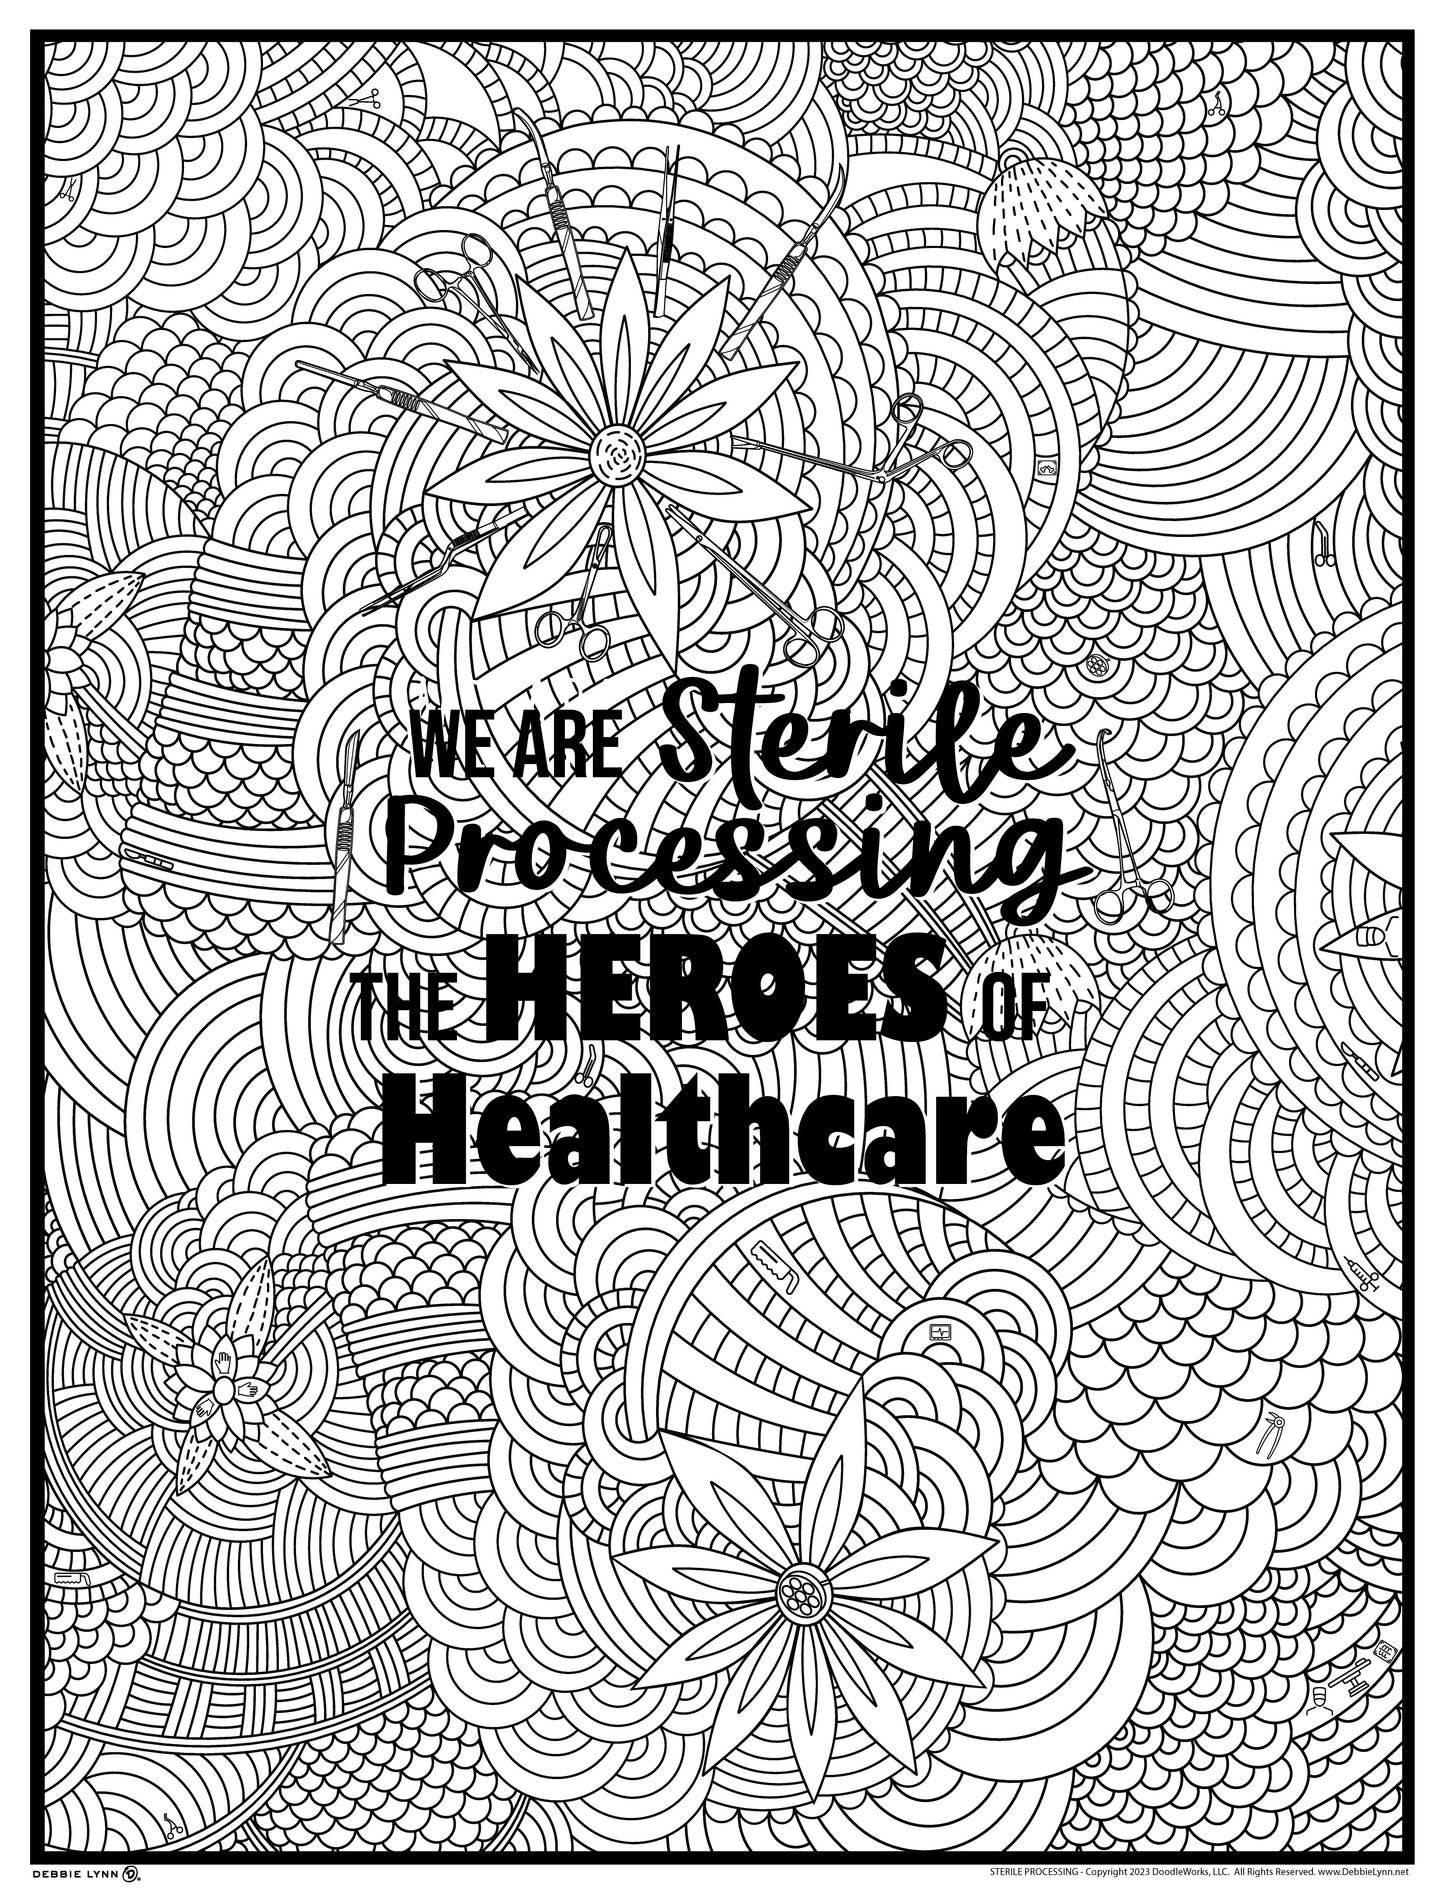 Sterile Processing Heroes Giant Coloring Poster 46x60"